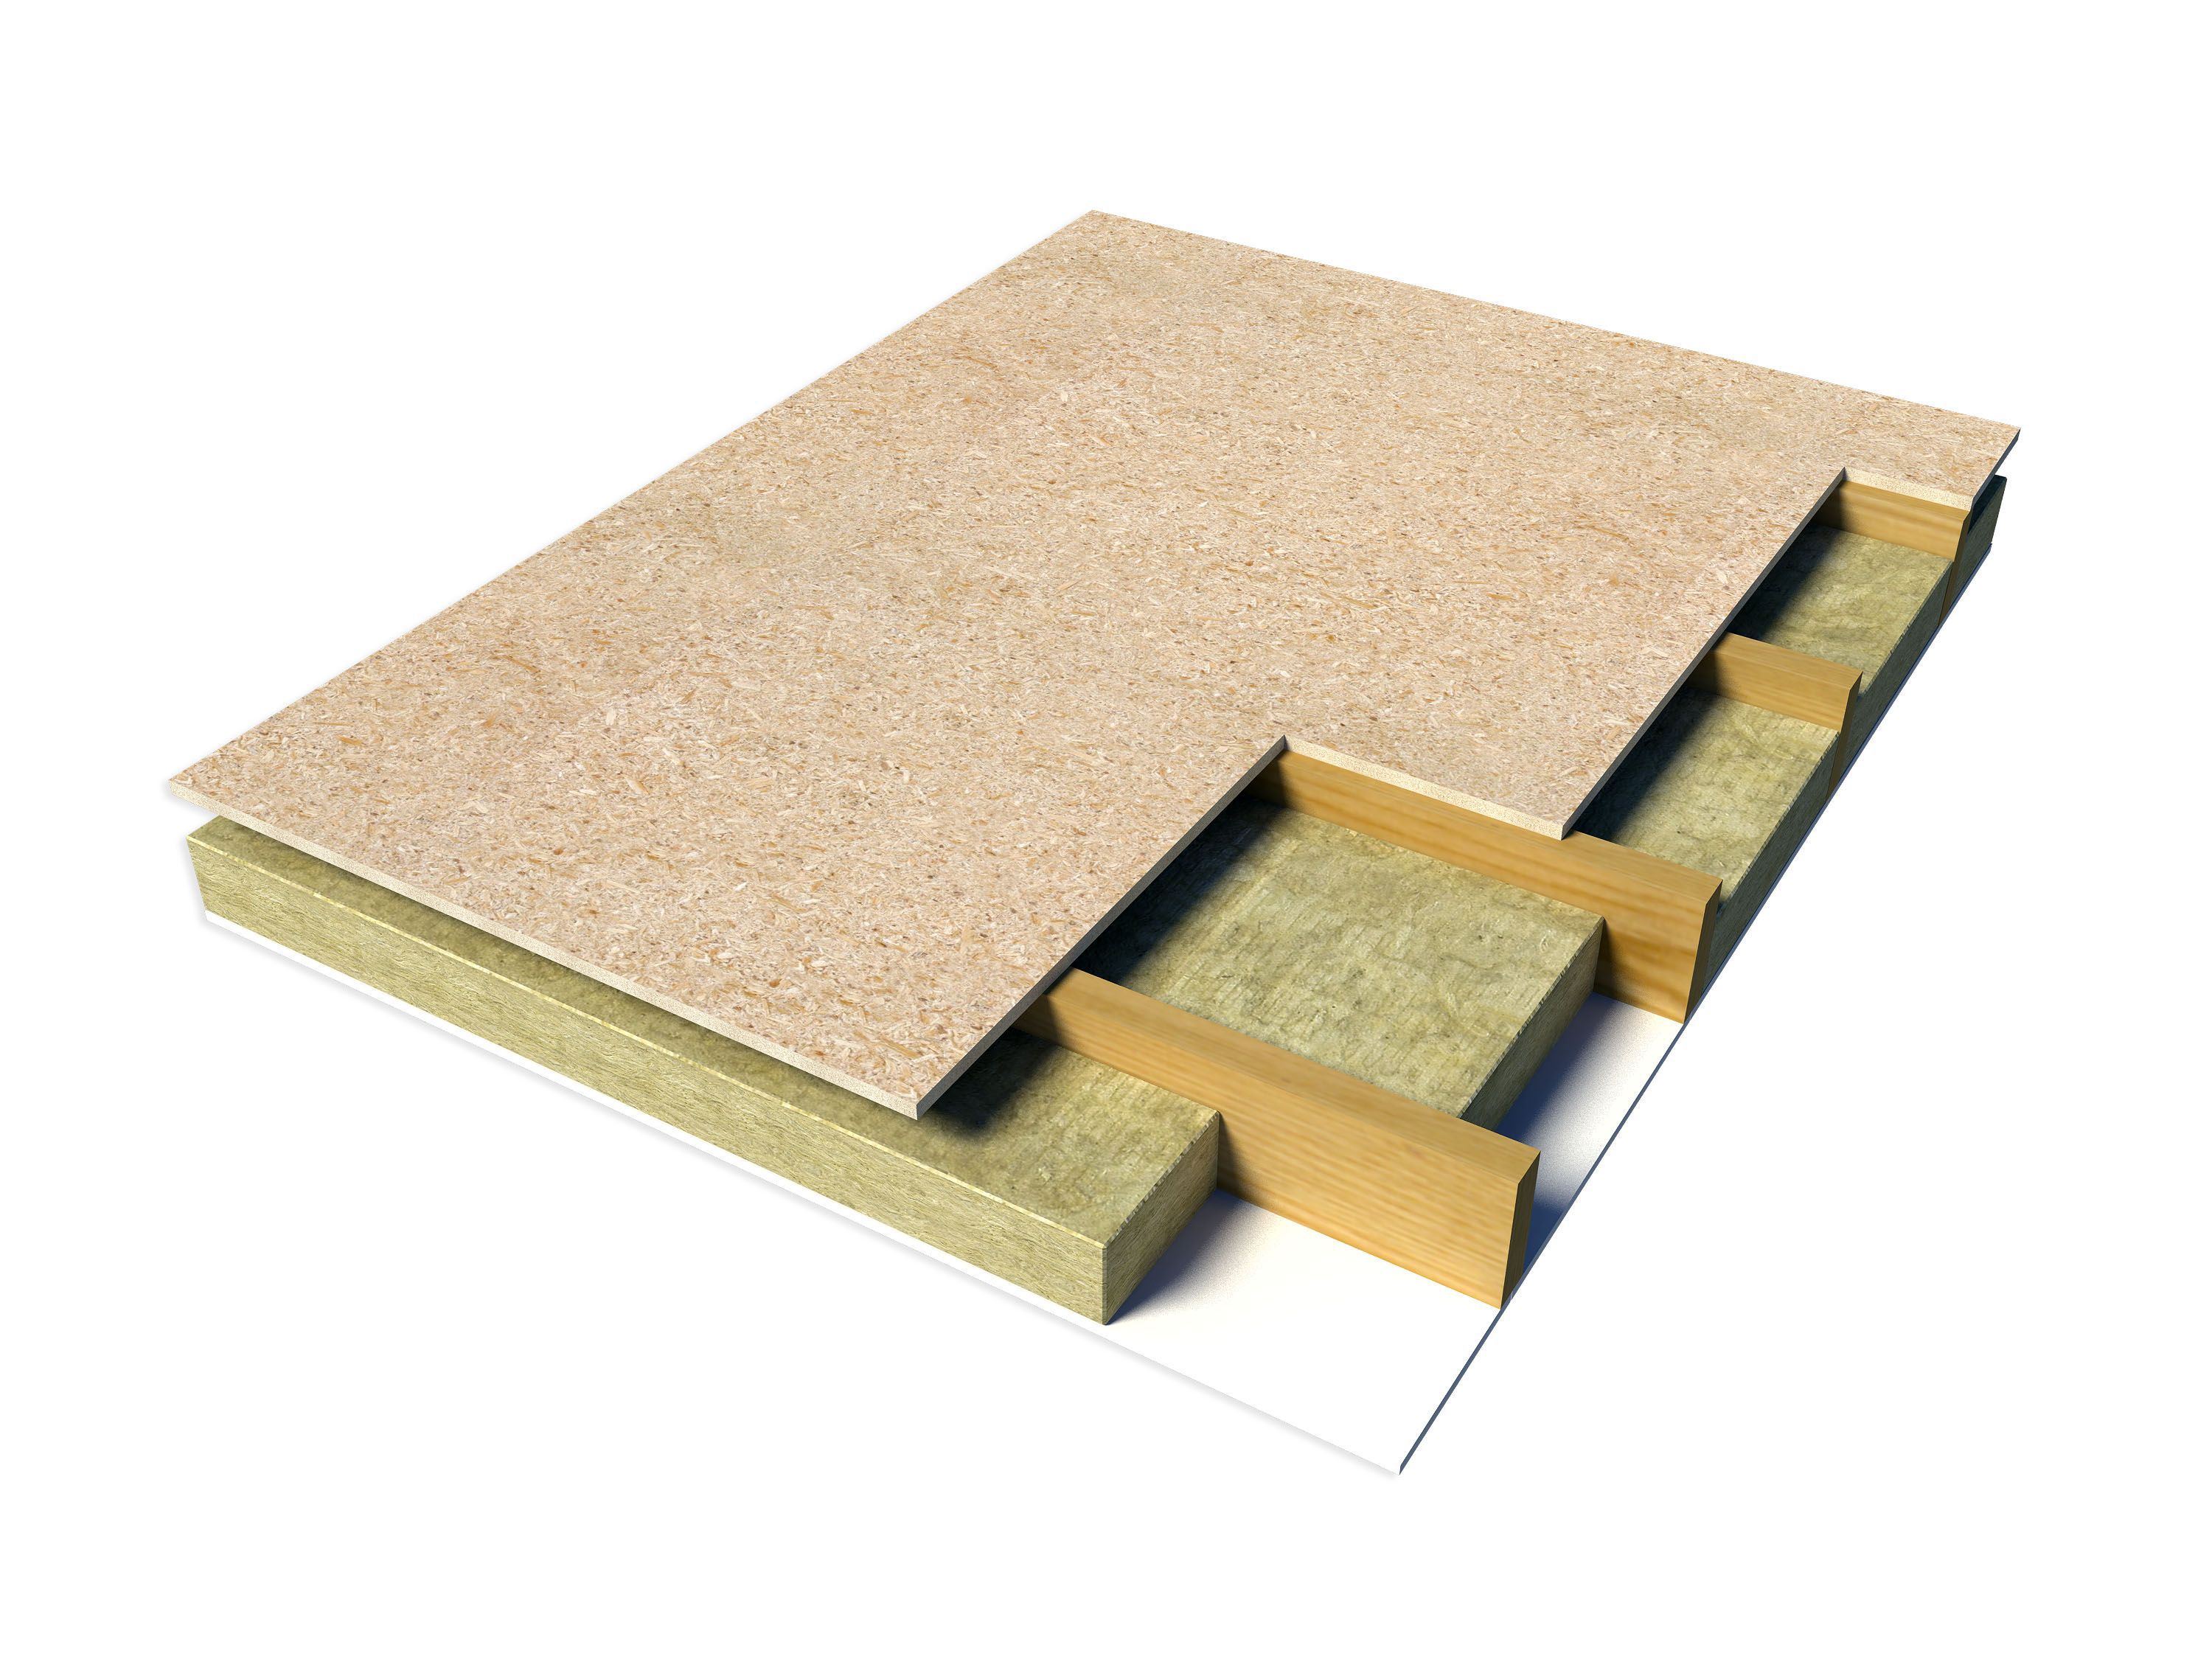 Rockwool Sound Stone wool fibres Insulation slab Pack of 6